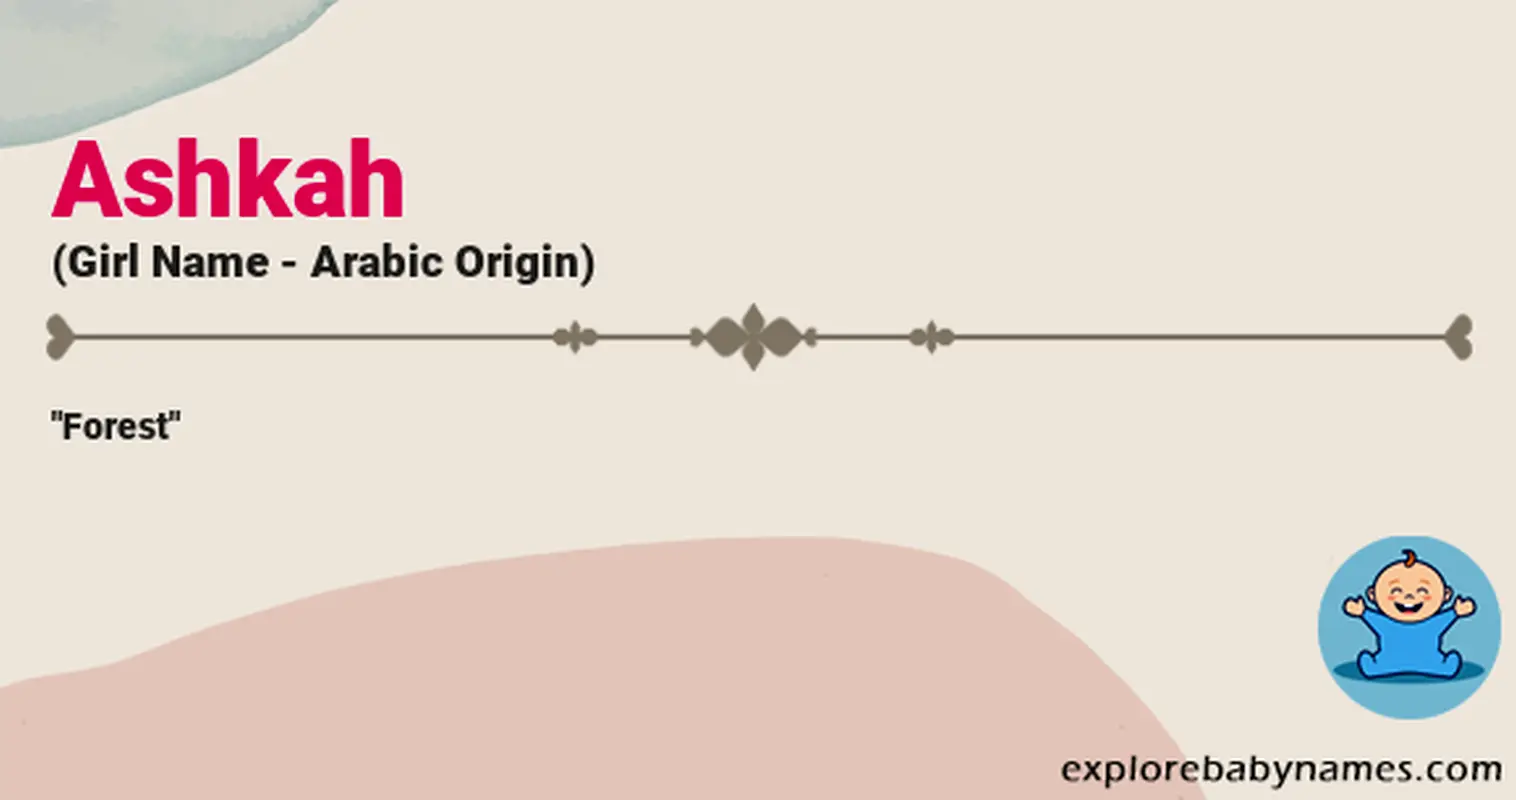 Meaning of Ashkah